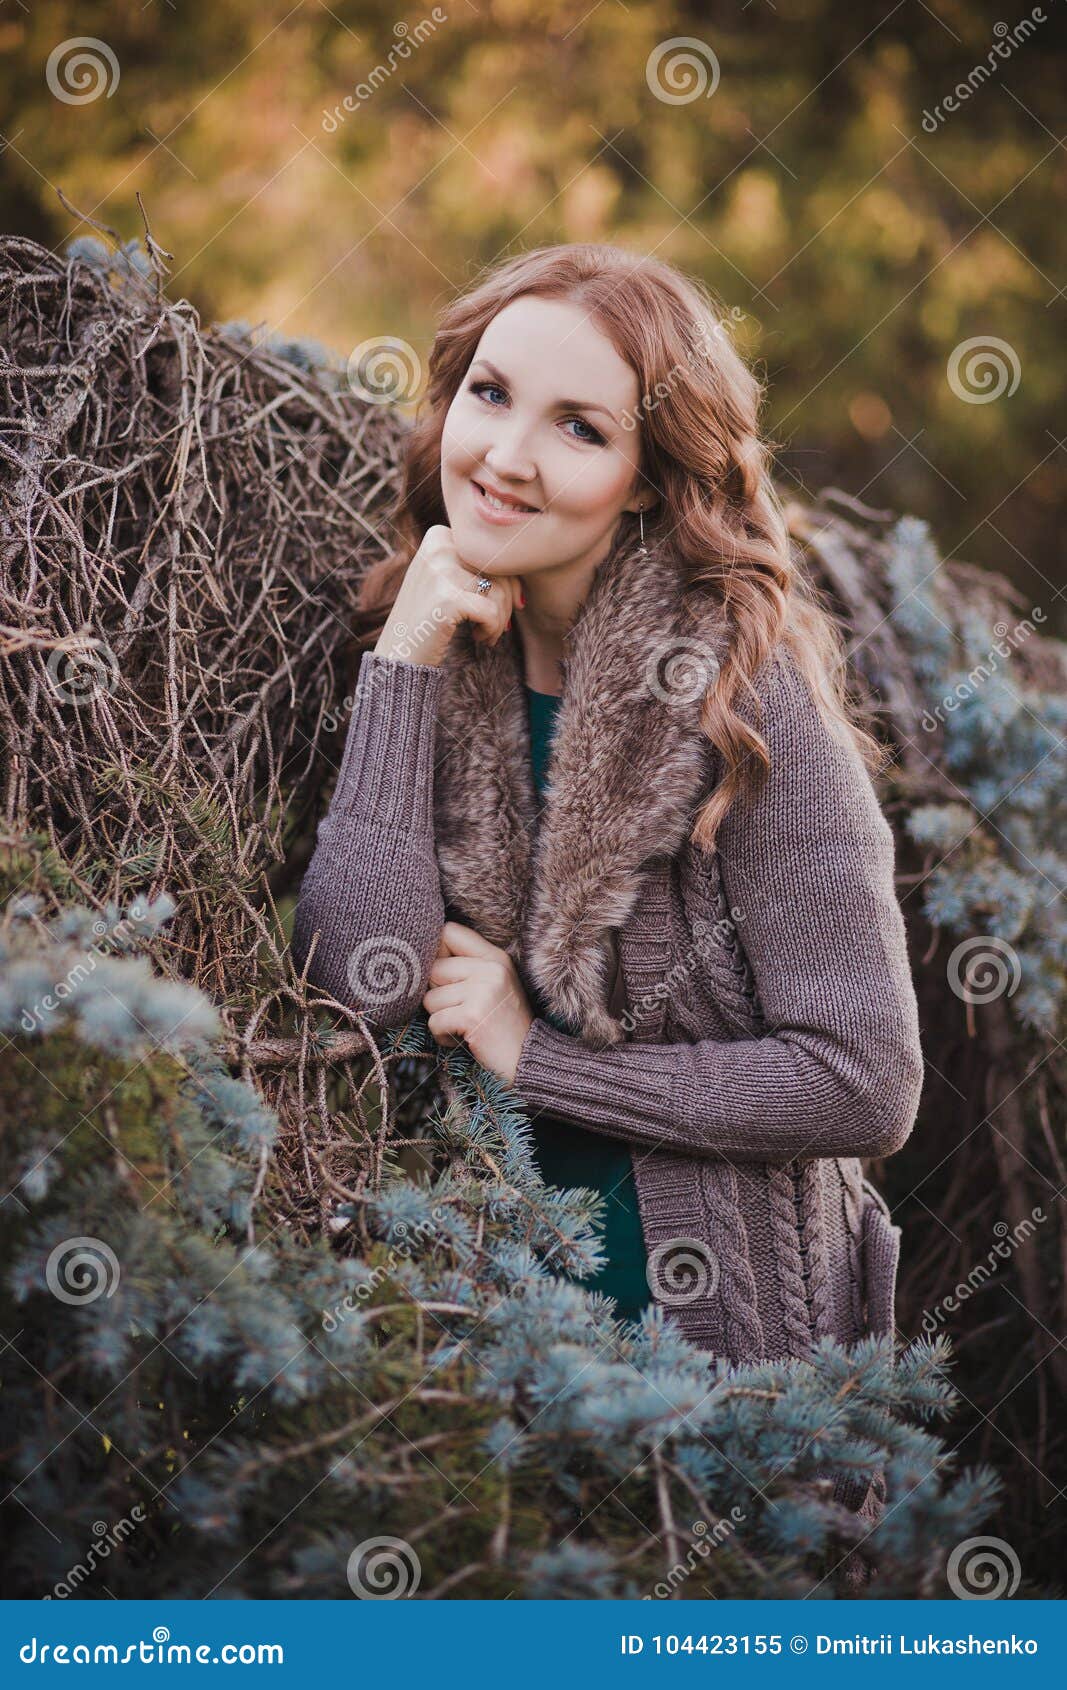 beautiful genuine lady mystic with curly brunette hairs and adorable eyes dressed in fancy stylish warm clothes with fur on neck l